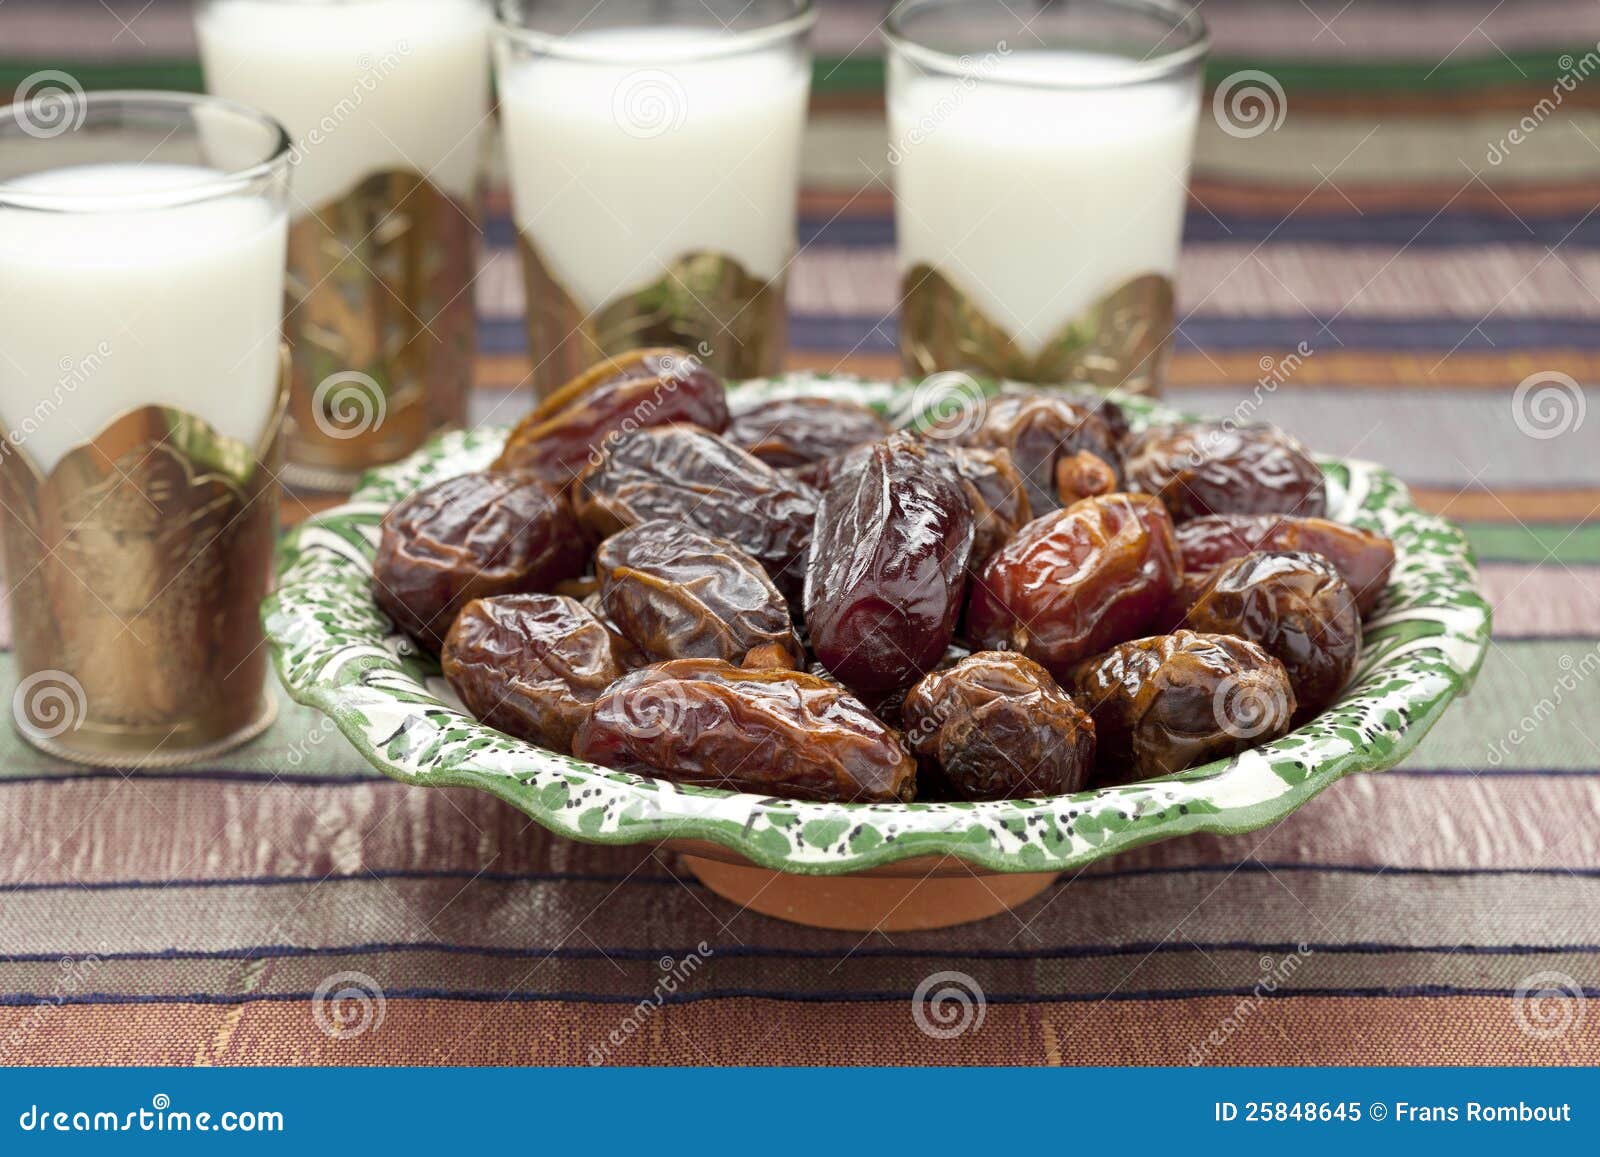 milk and dates for iftar meal